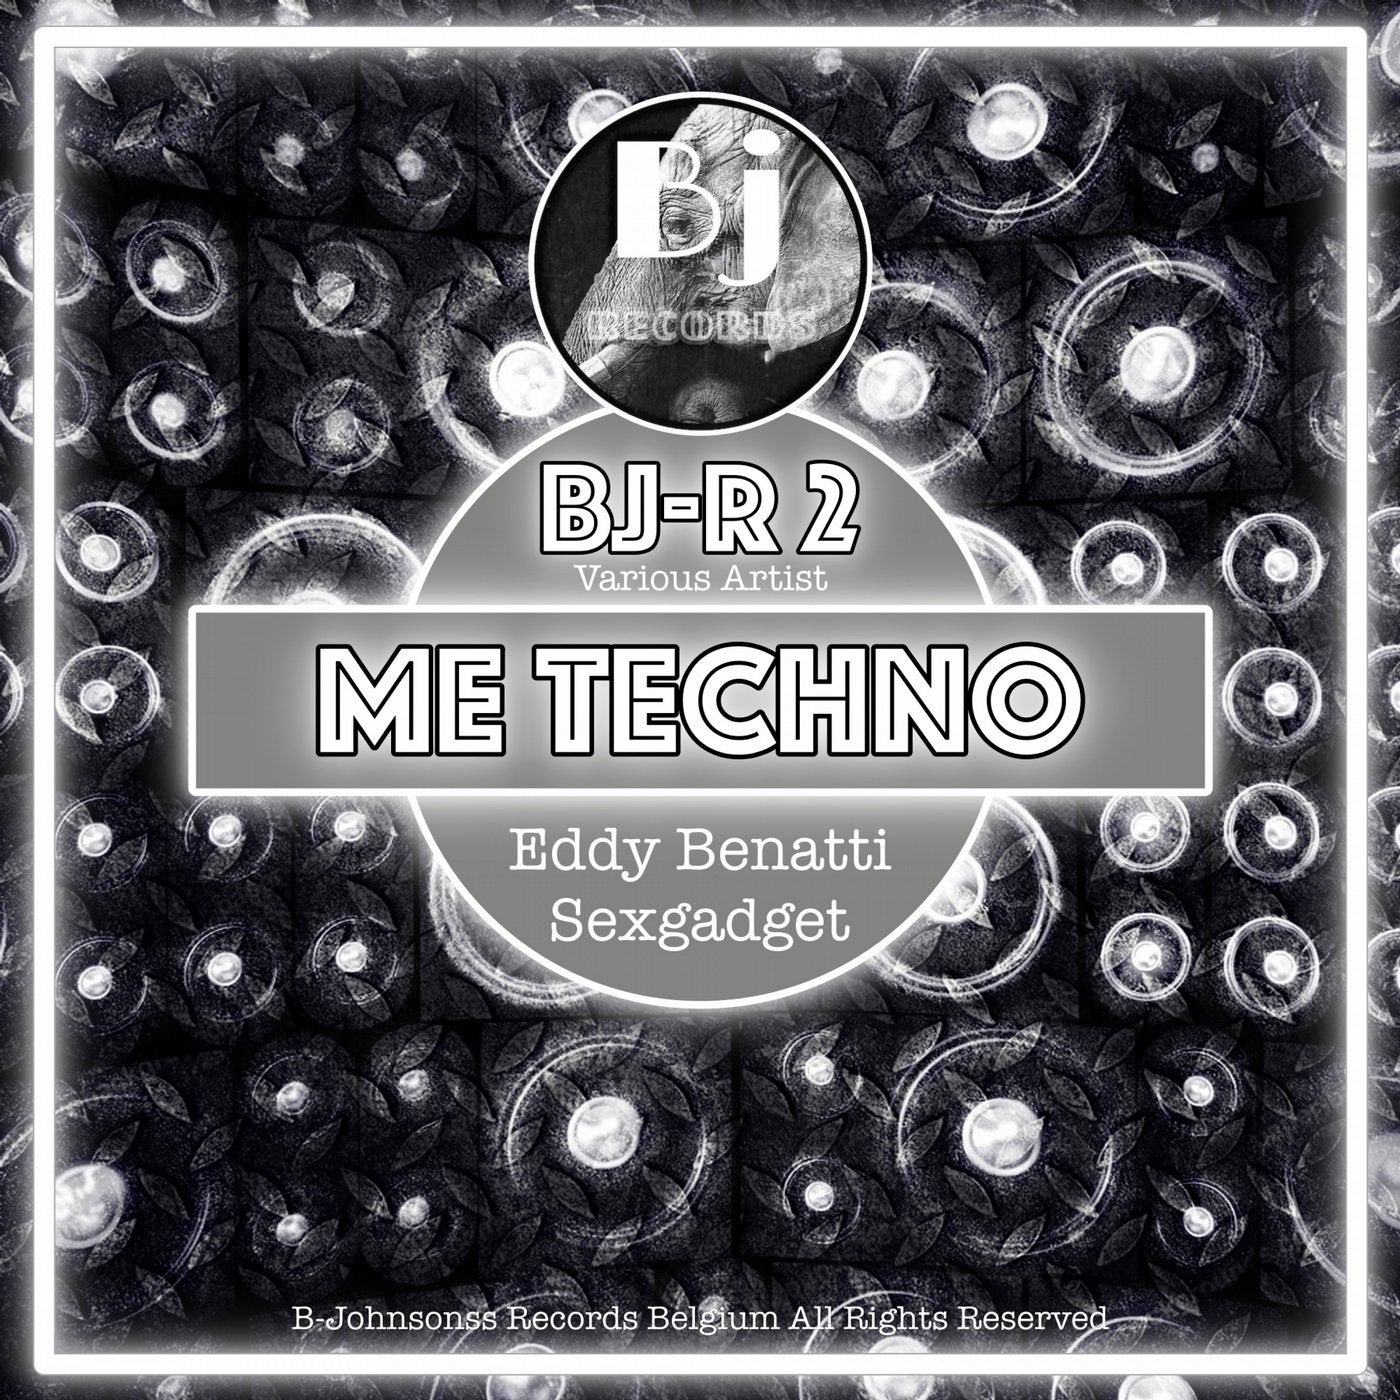 Me Techno (Second Edition of the New Bj-R Series !)